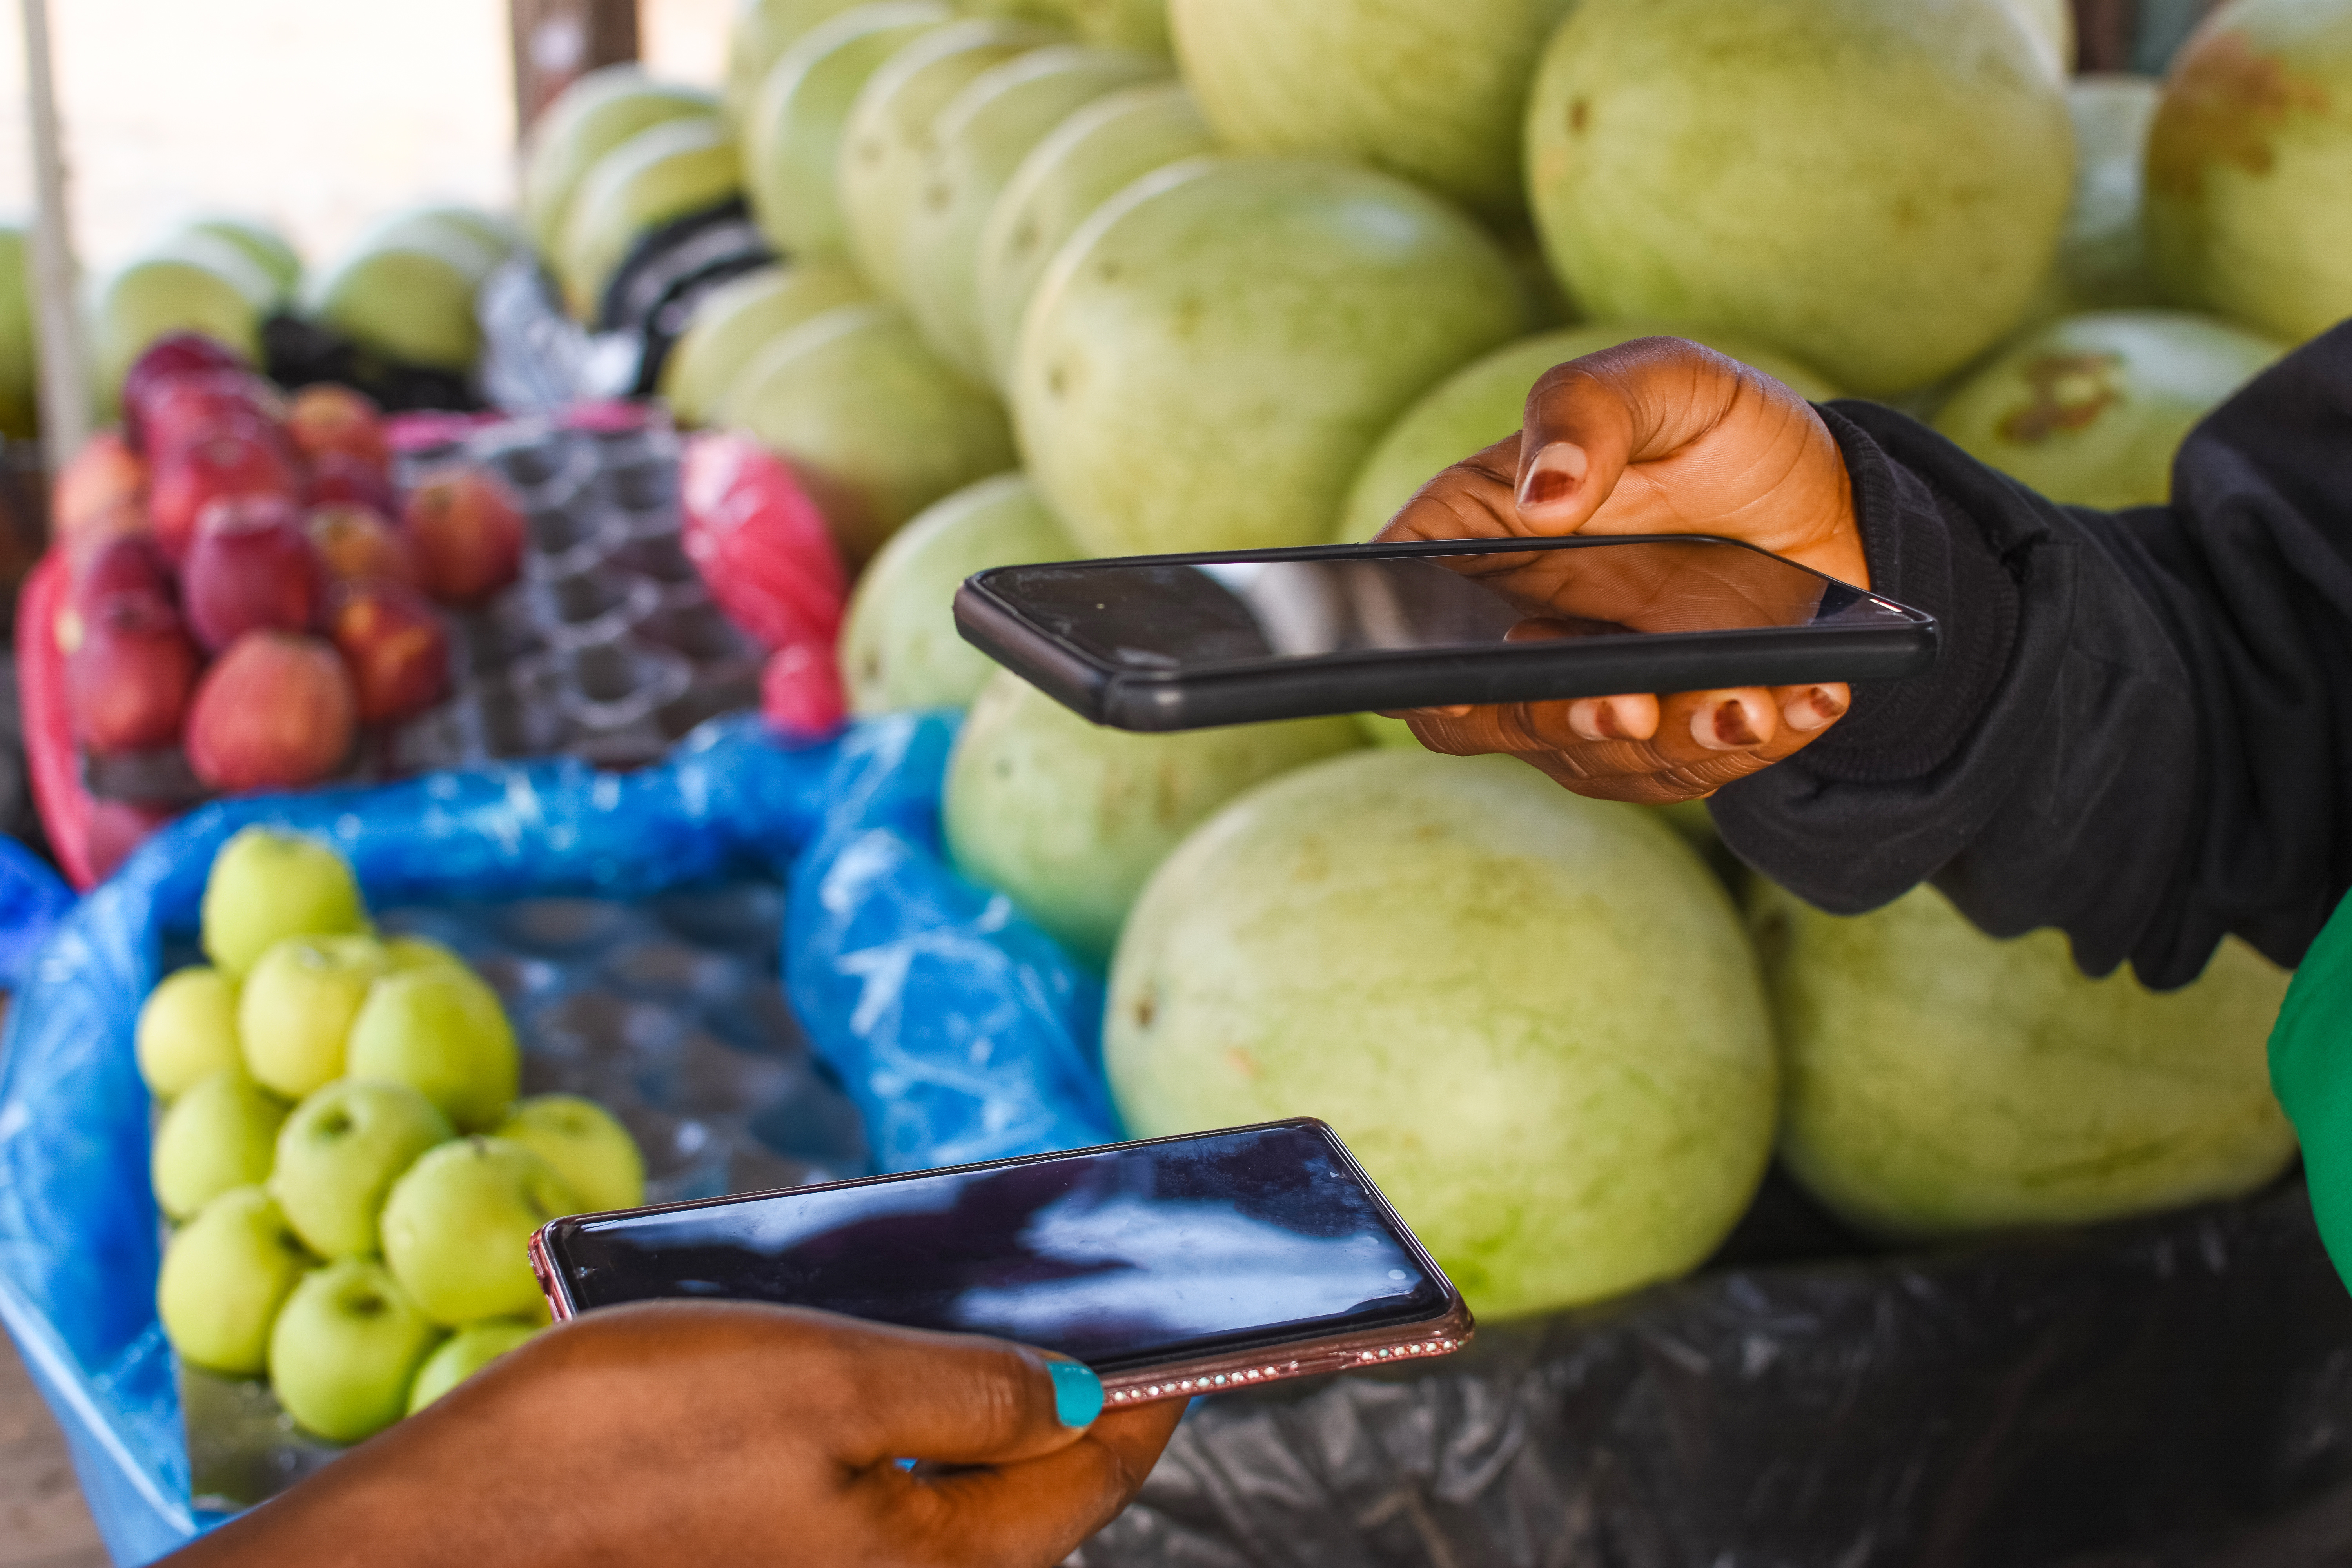 cell phone transaction in a market